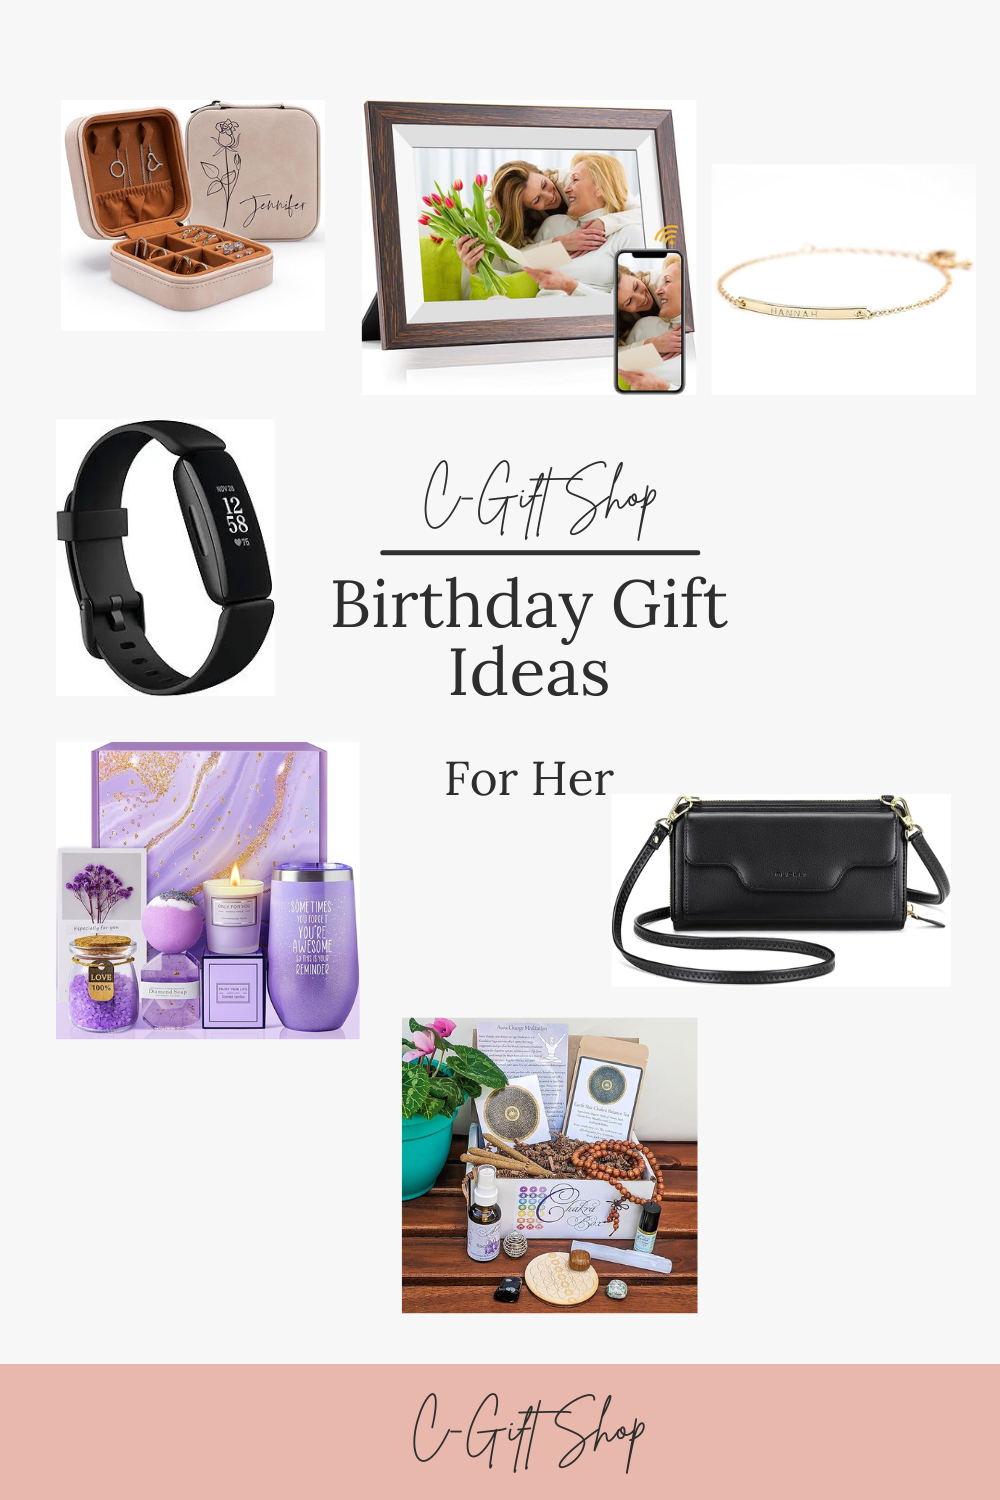 25 BIRTHDAY PRESENT IDEAS FOR WIVES - Best Gift for Wife on Her Birthday